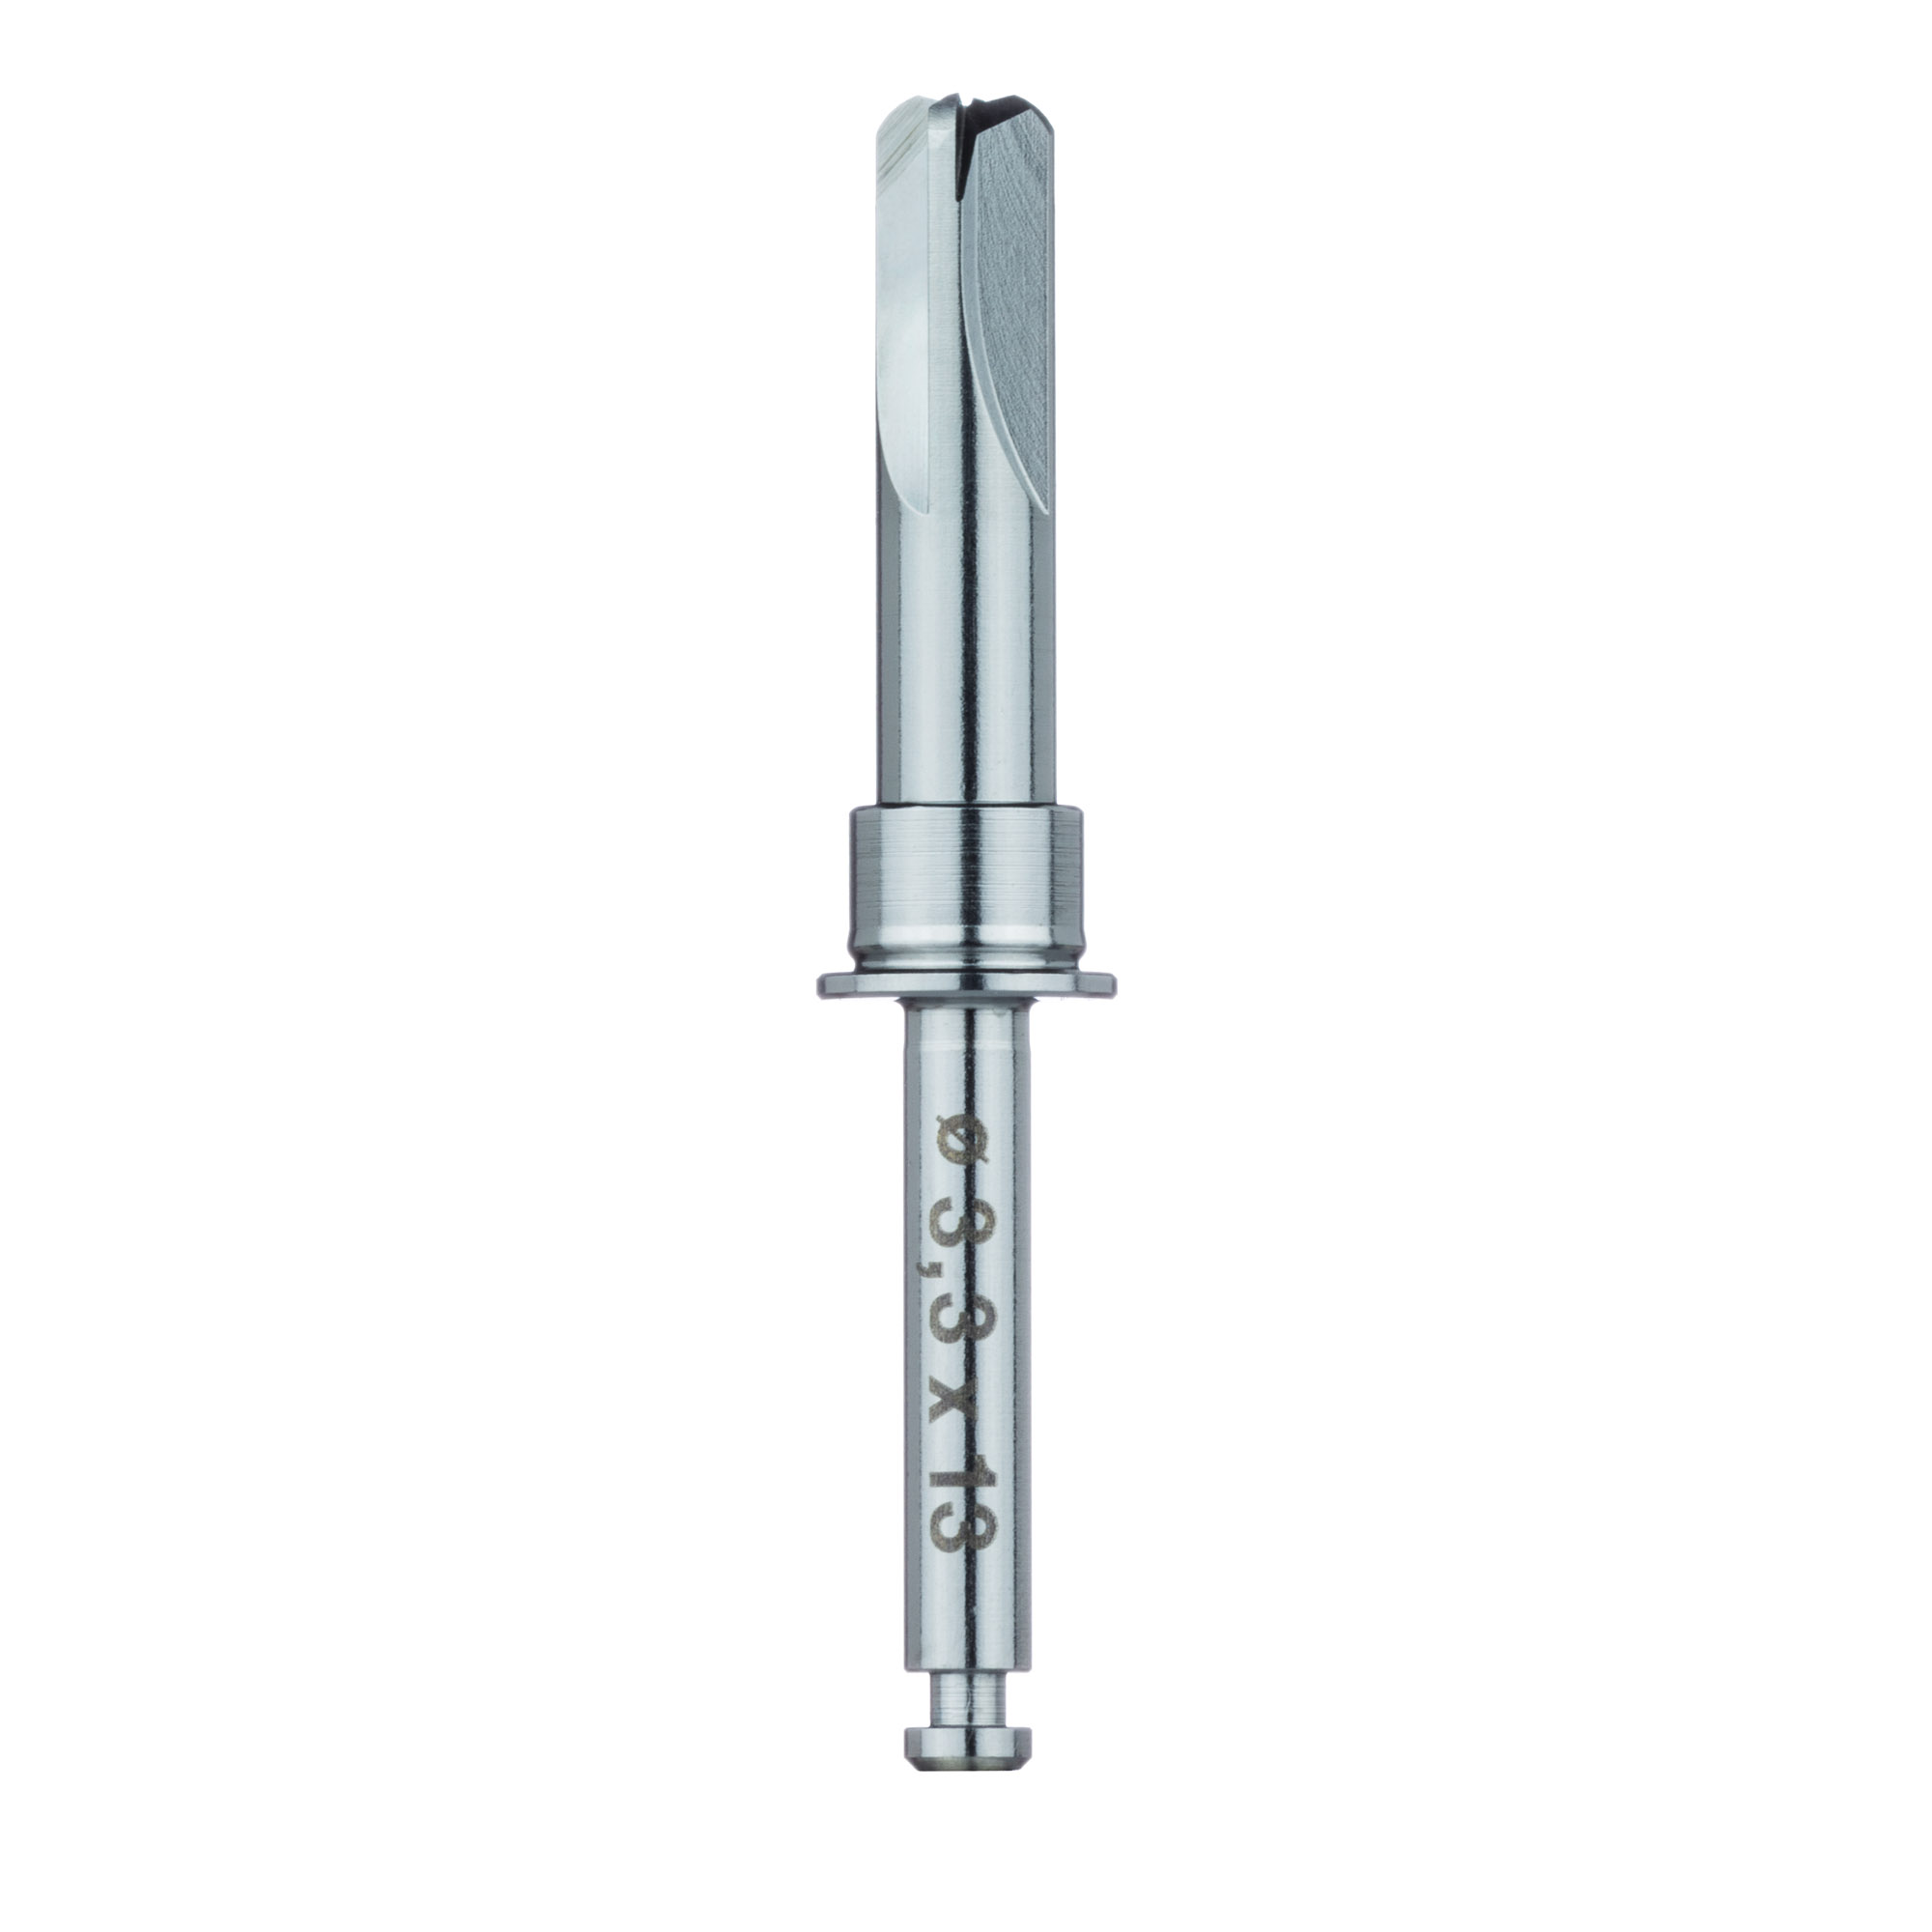 CL004 Surgery, Crestal Drill with Stop, 3.3mm Ø, RAXL